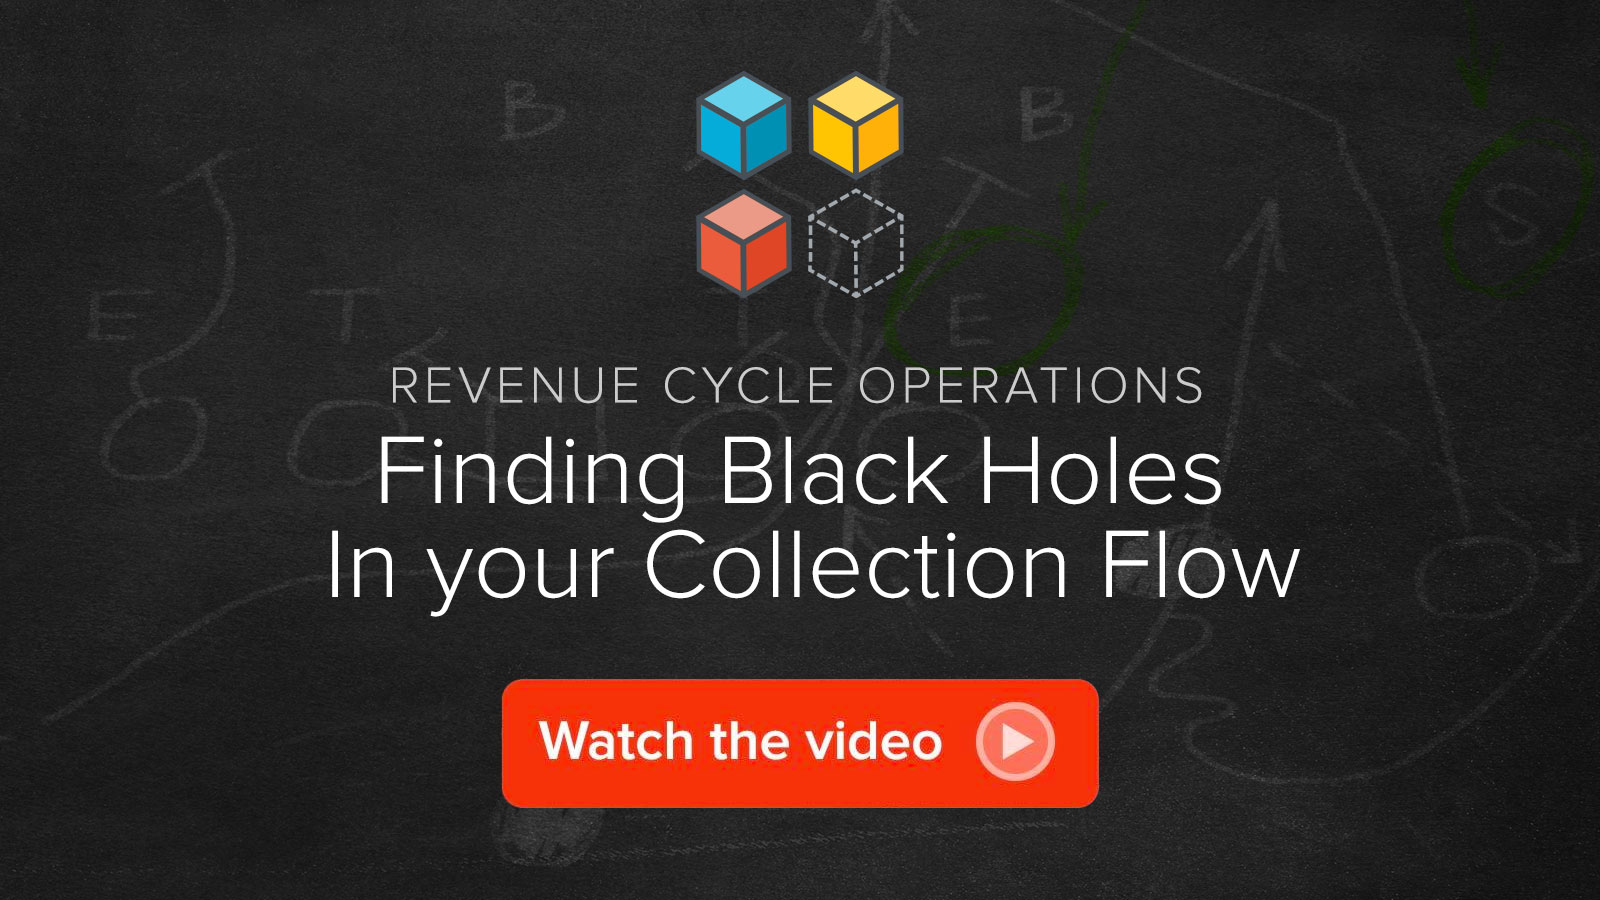 Watch the Finding Black Holes In Your Collection Flow video